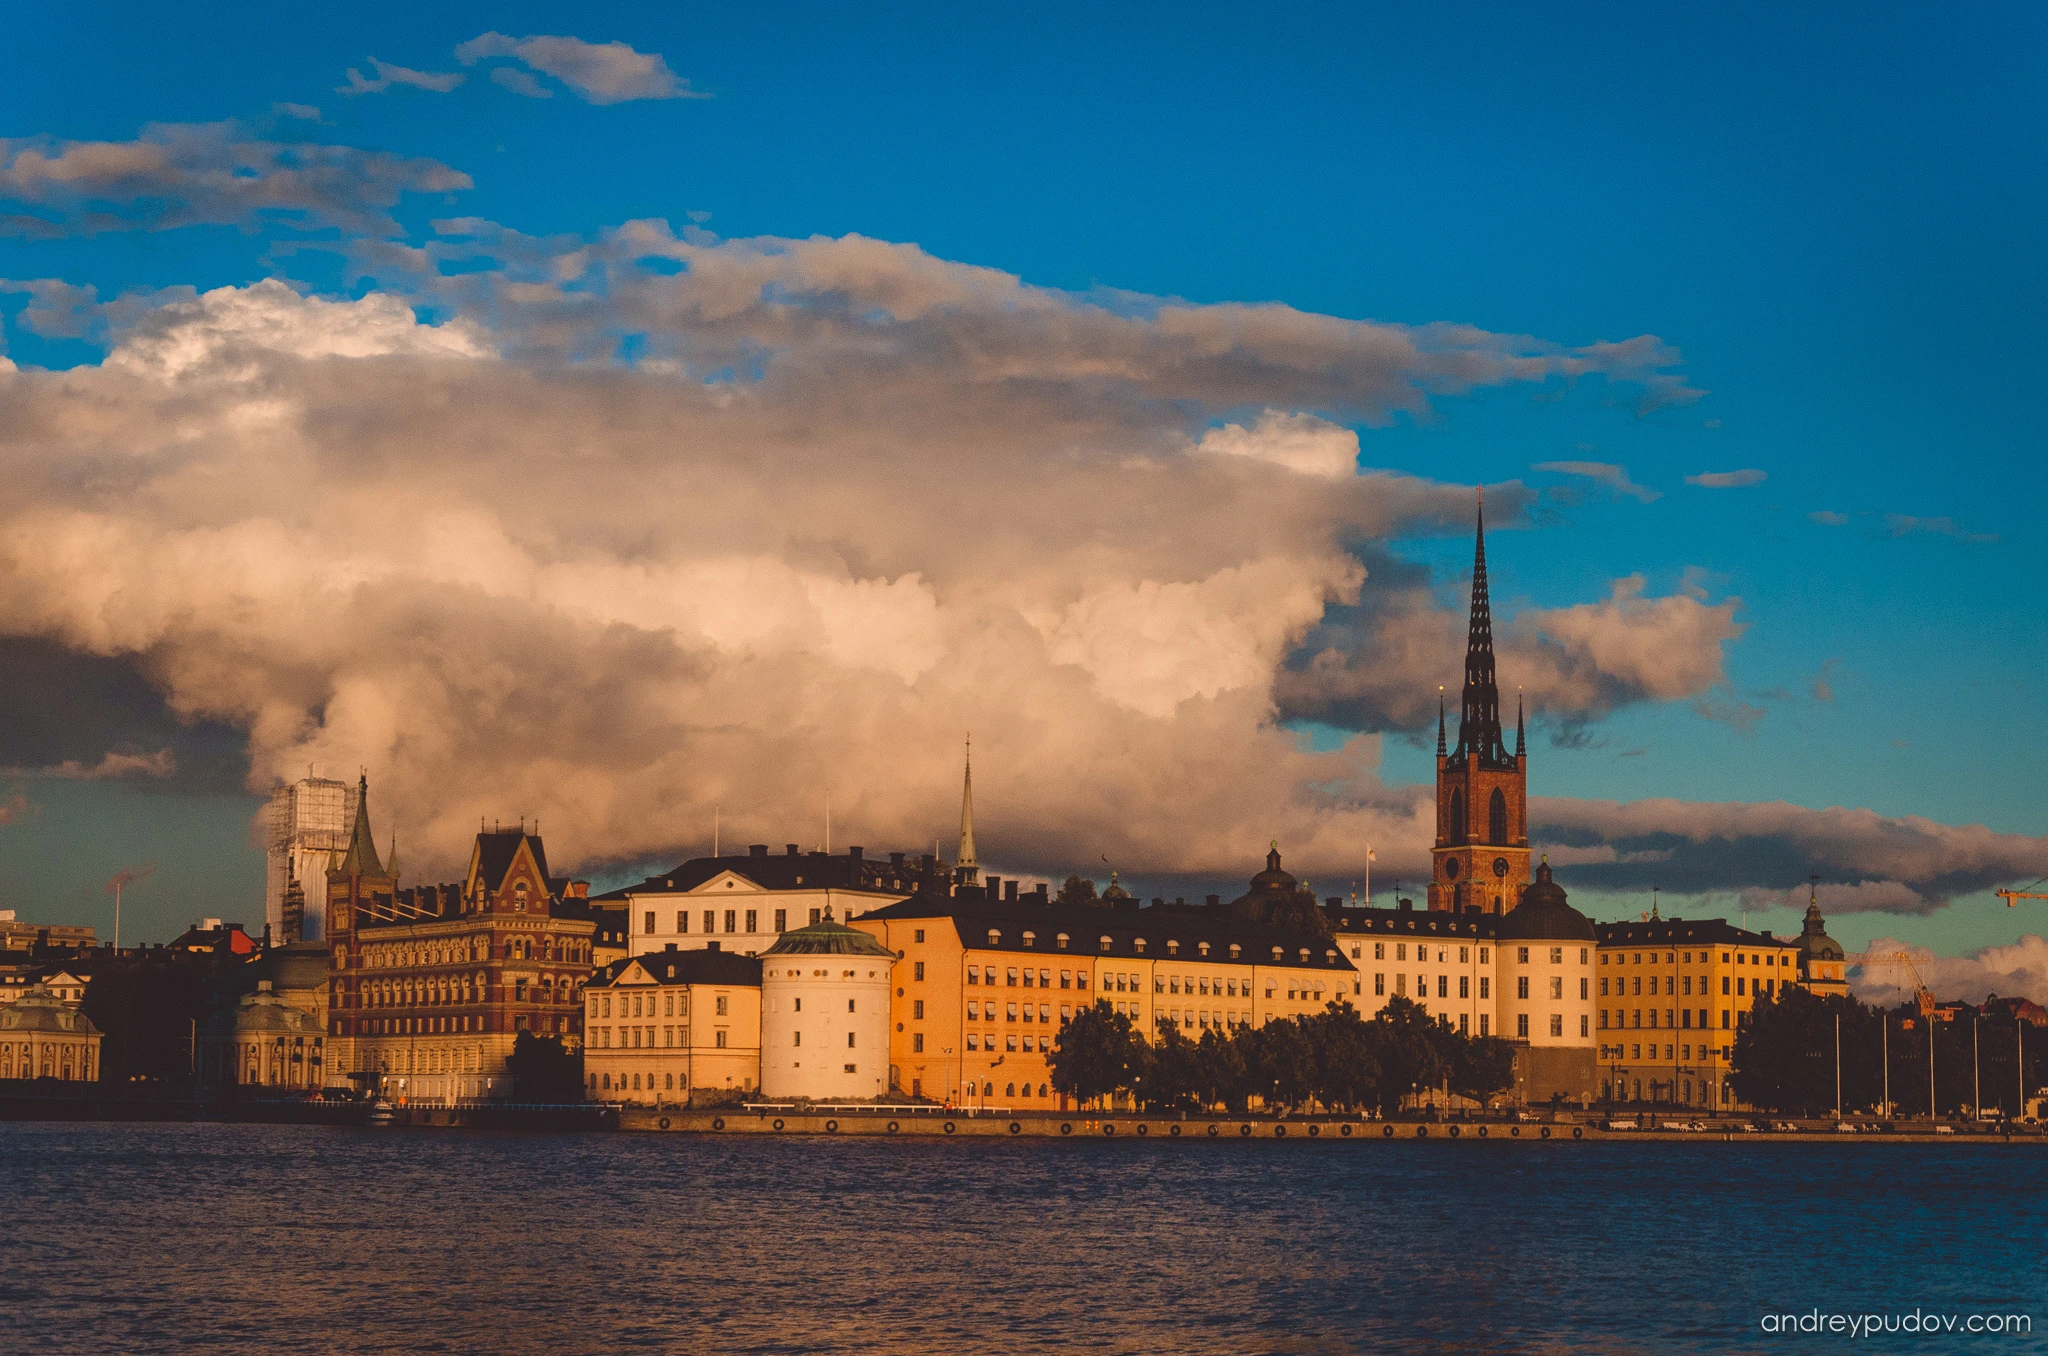 Stockholm. Conquering Scandinavia - Old Town